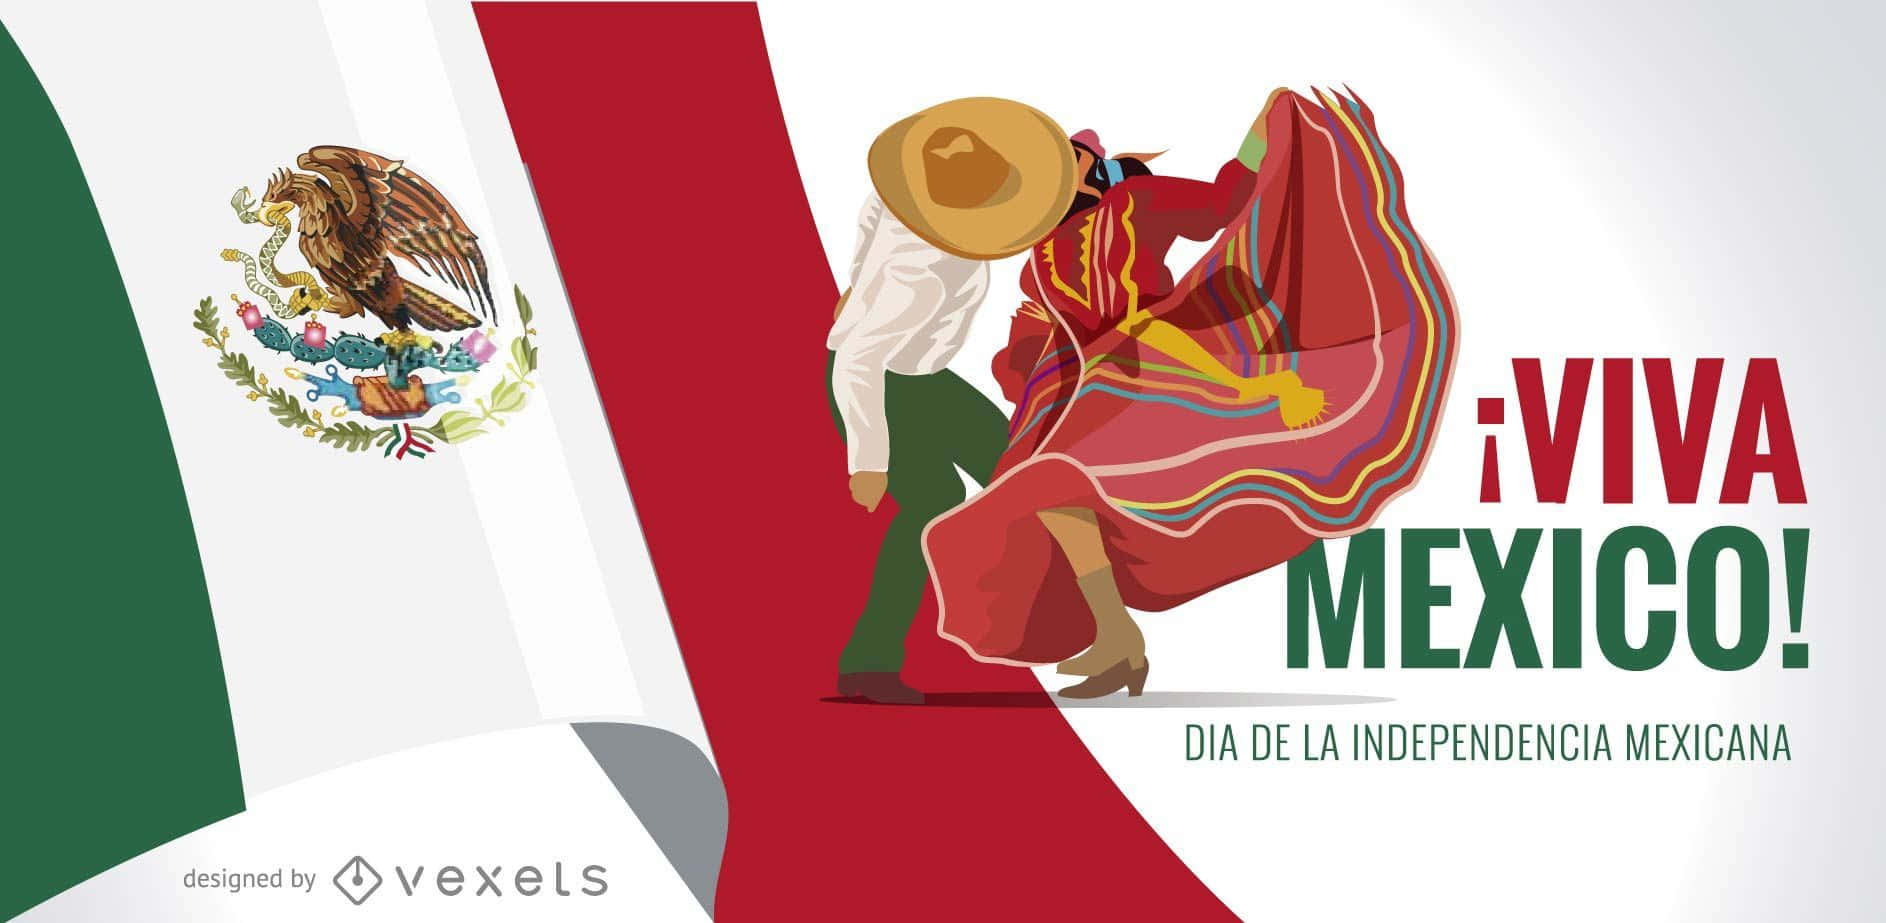 “Viva Mexico! Celebrating the Country's Cultural Heritage.” Wallpaper